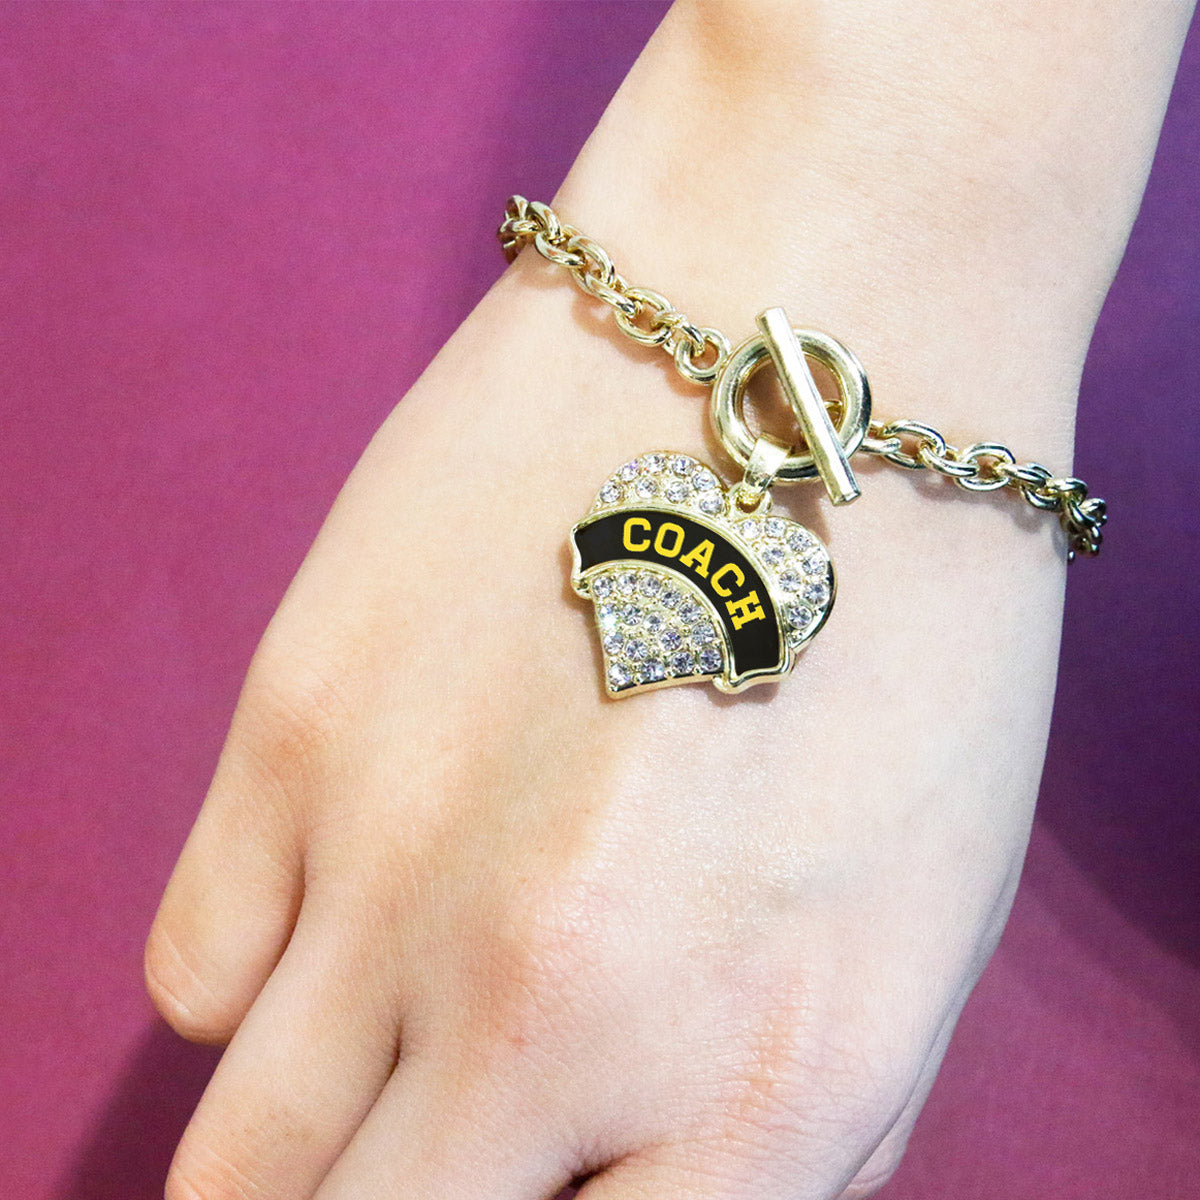 Gold Coach - Black and Yellow Pave Heart Charm Toggle Bracelet